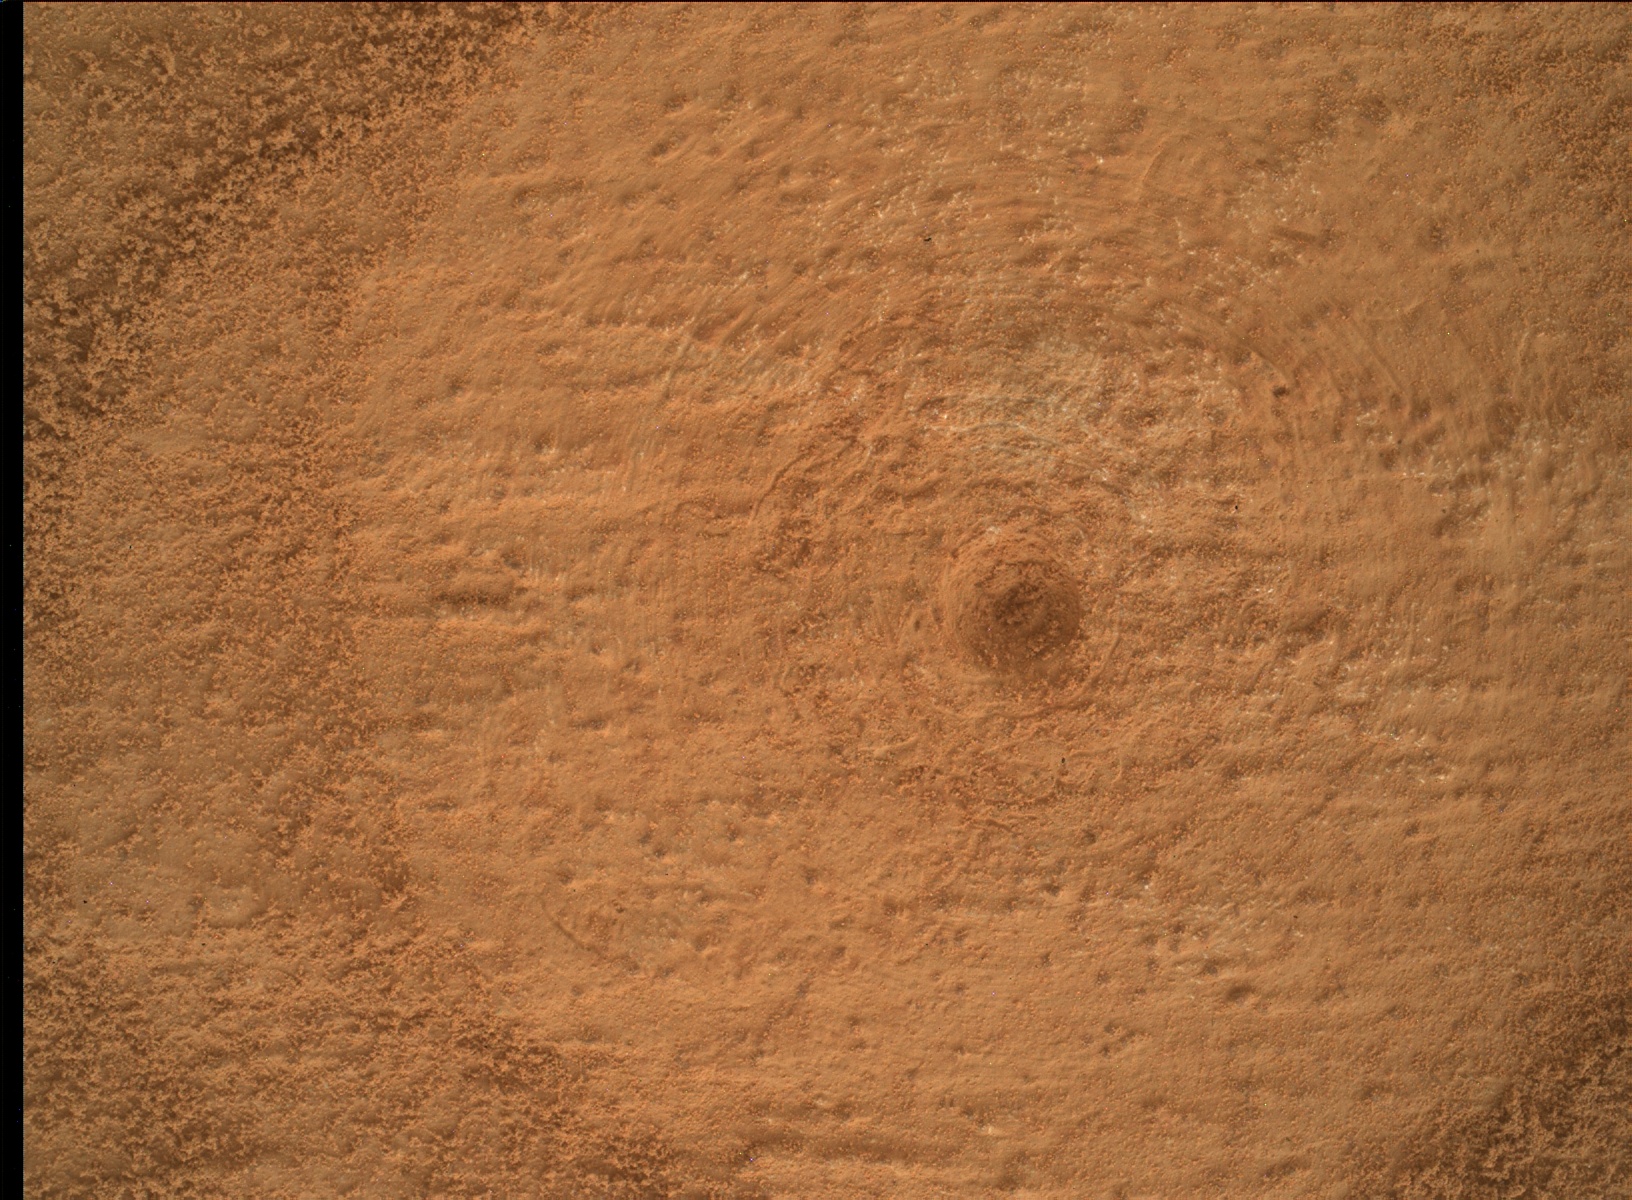 Nasa's Mars rover Curiosity acquired this image using its Mars Hand Lens Imager (MAHLI) on Sol 3488